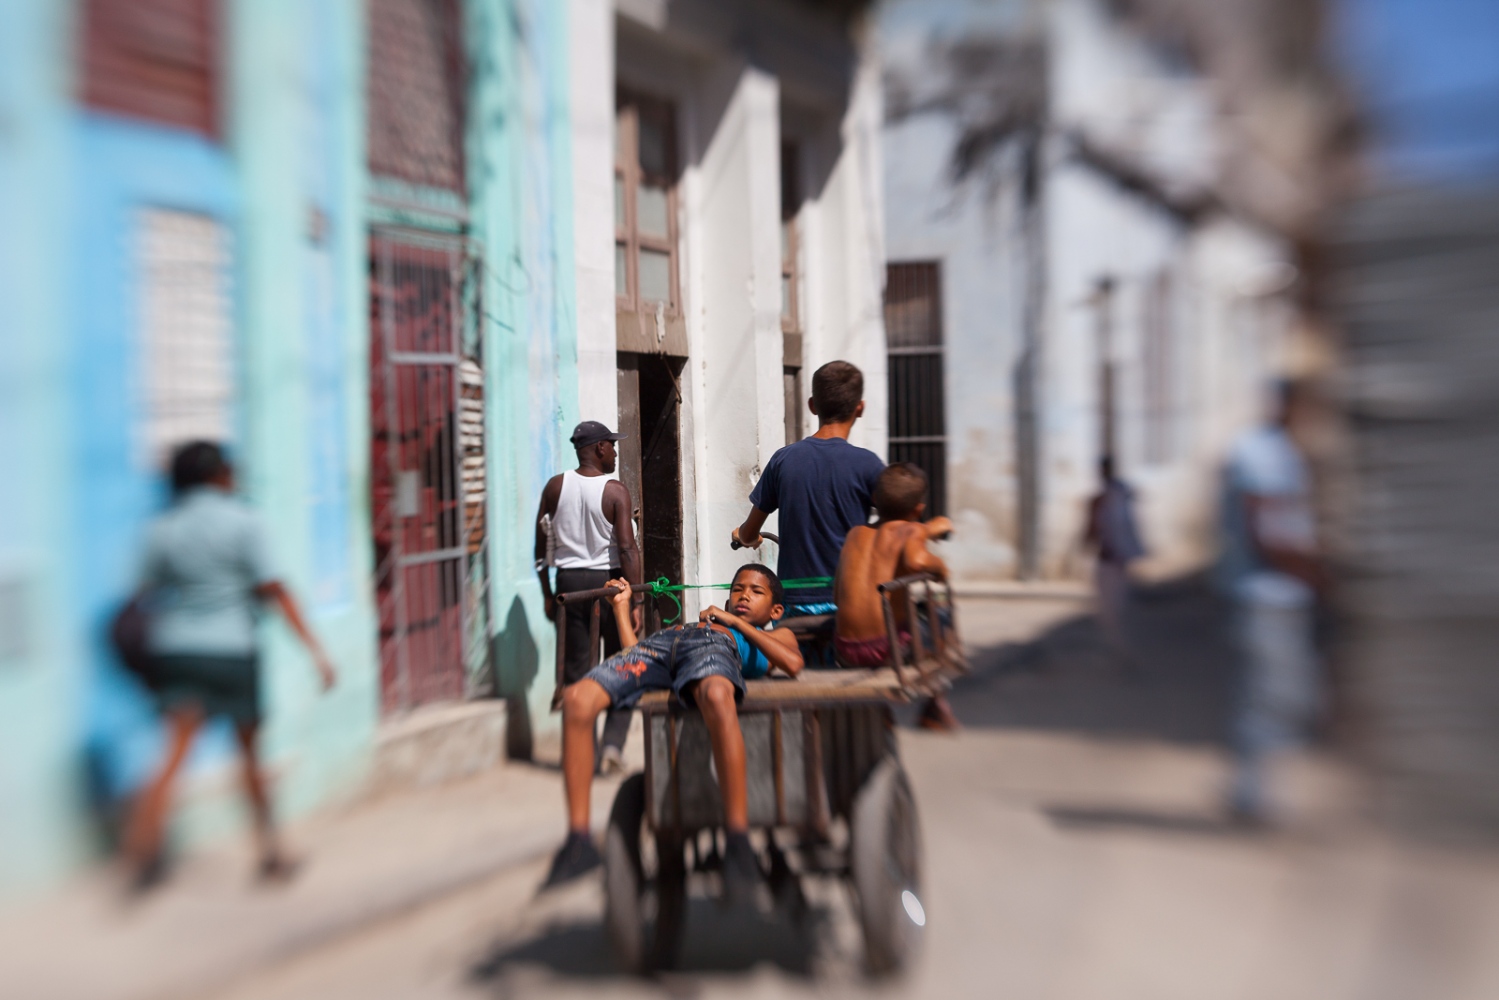 To the outsider, visiting Havana is like stepping back in time to the late 1950s.